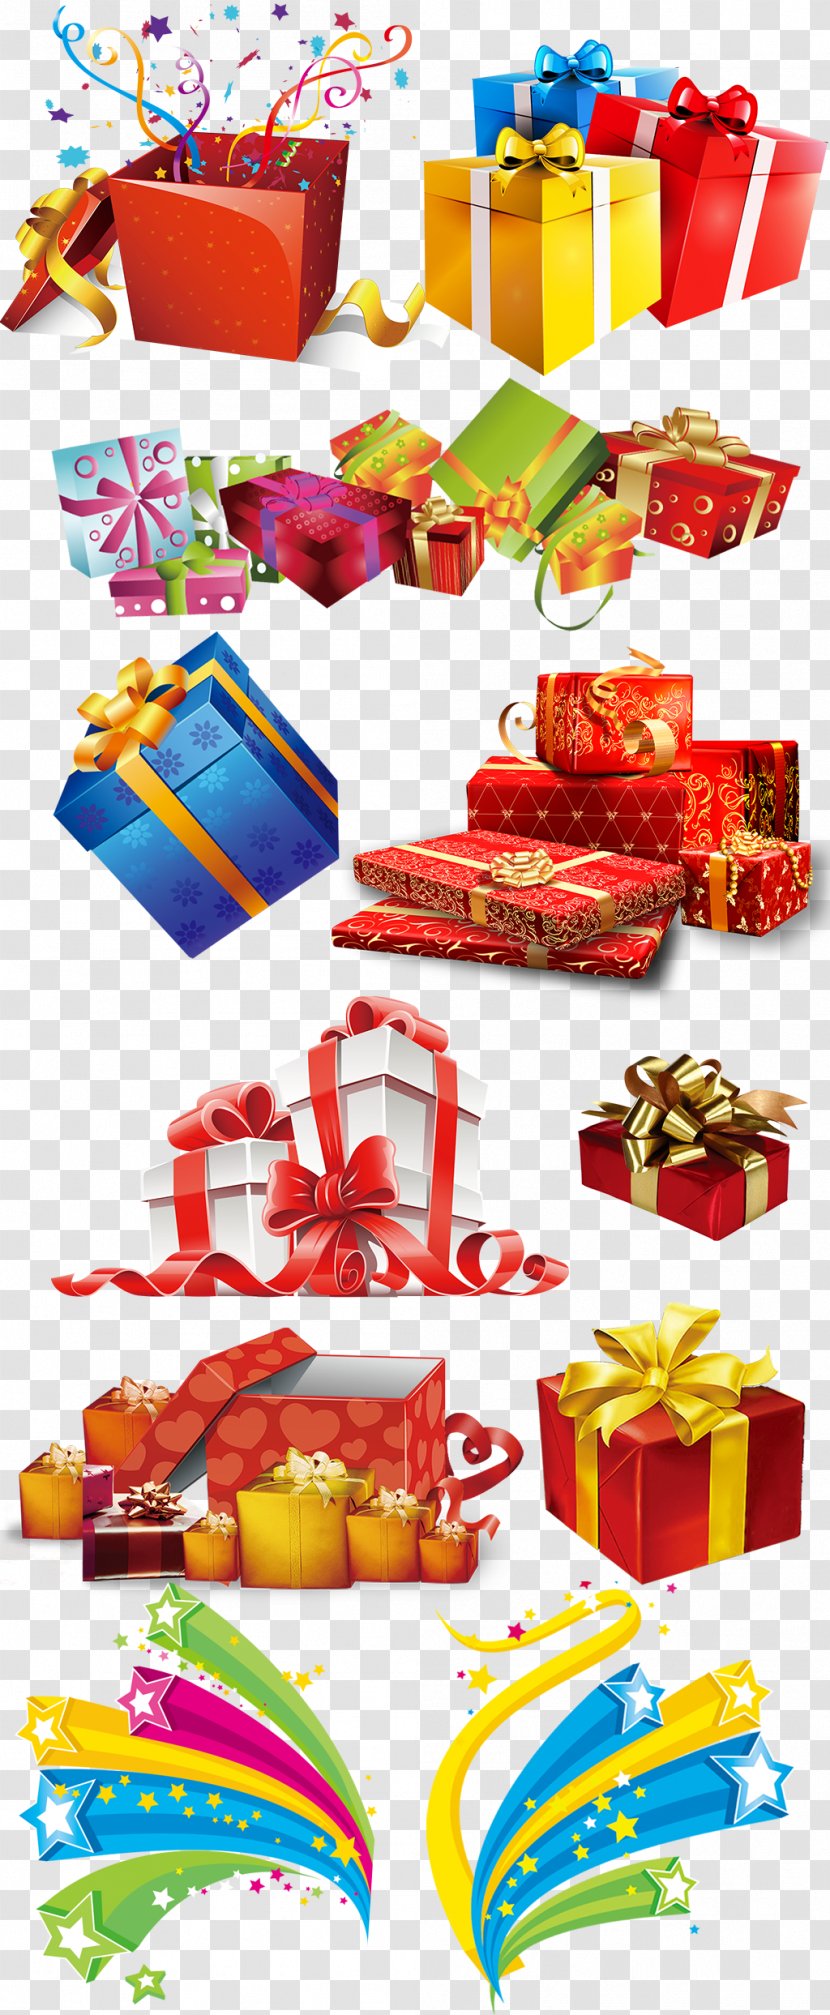 Template Clip Art - Image Resolution - Colored Colorful Gift Box Collection Transparent PNG